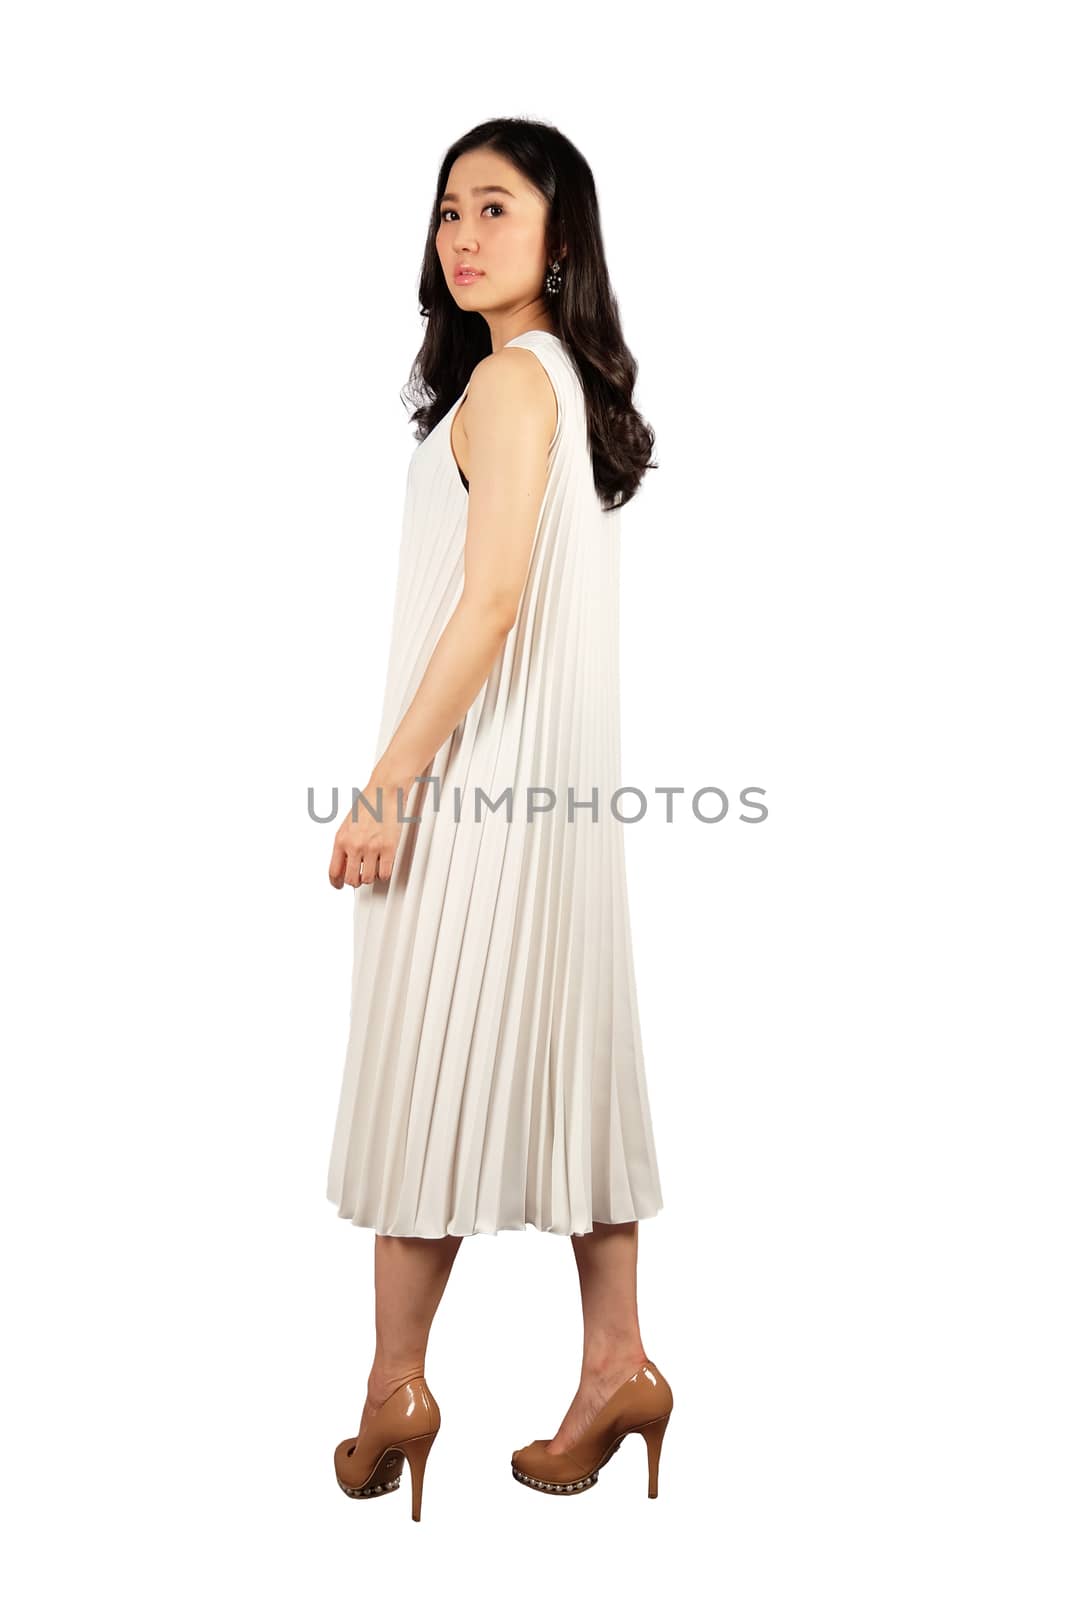 Young asian woman in white dress looking at the camera on white isolate with clipping path